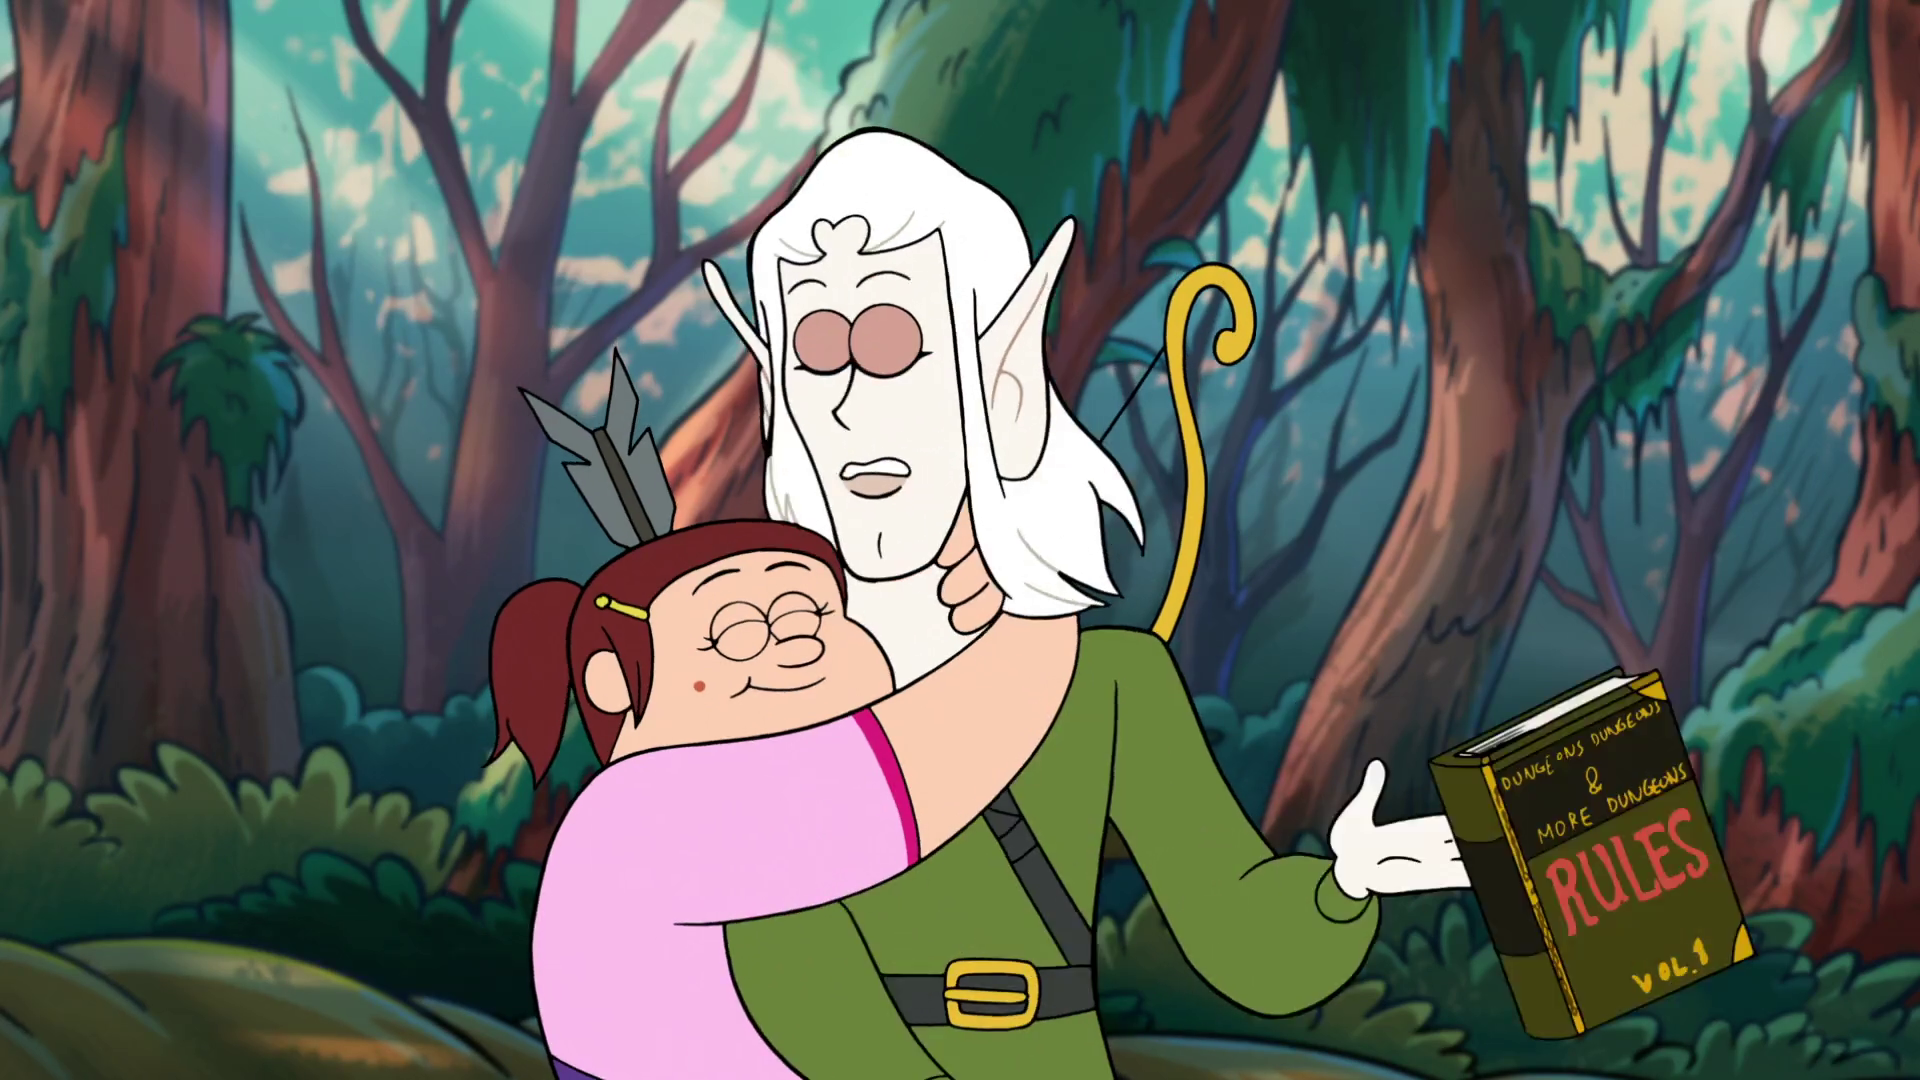 Image S2e13 Hot Elfpng Gravity Falls Wiki FANDOM Powered By Wikia